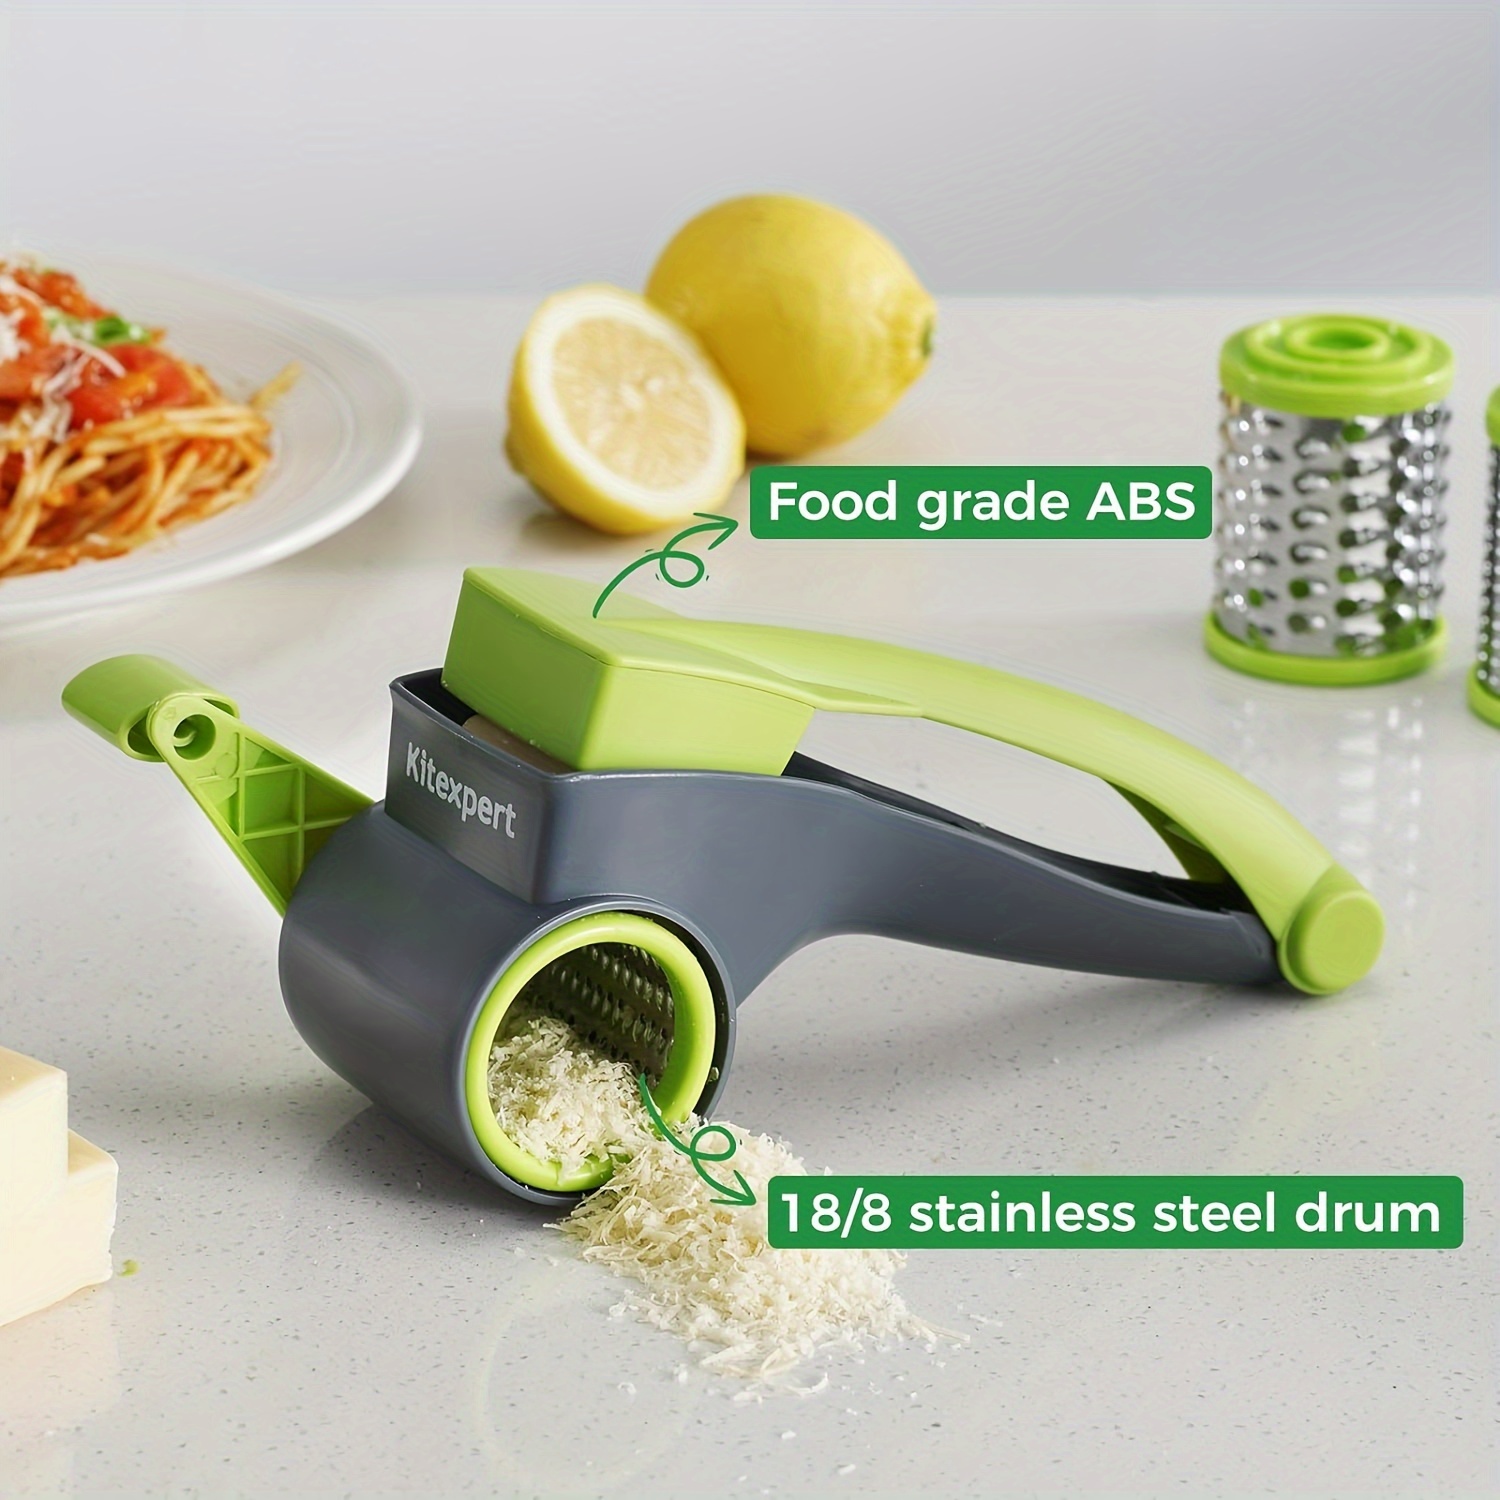  Cheese Grater with Handle, Parmesan Cheese Grater, Handheld Rotary  Cheese Grater, Olive Garden Cheese Grater with 2 Stainless Steel Drums for  Hard Cheese, Chocolate, Nuts: Home & Kitchen